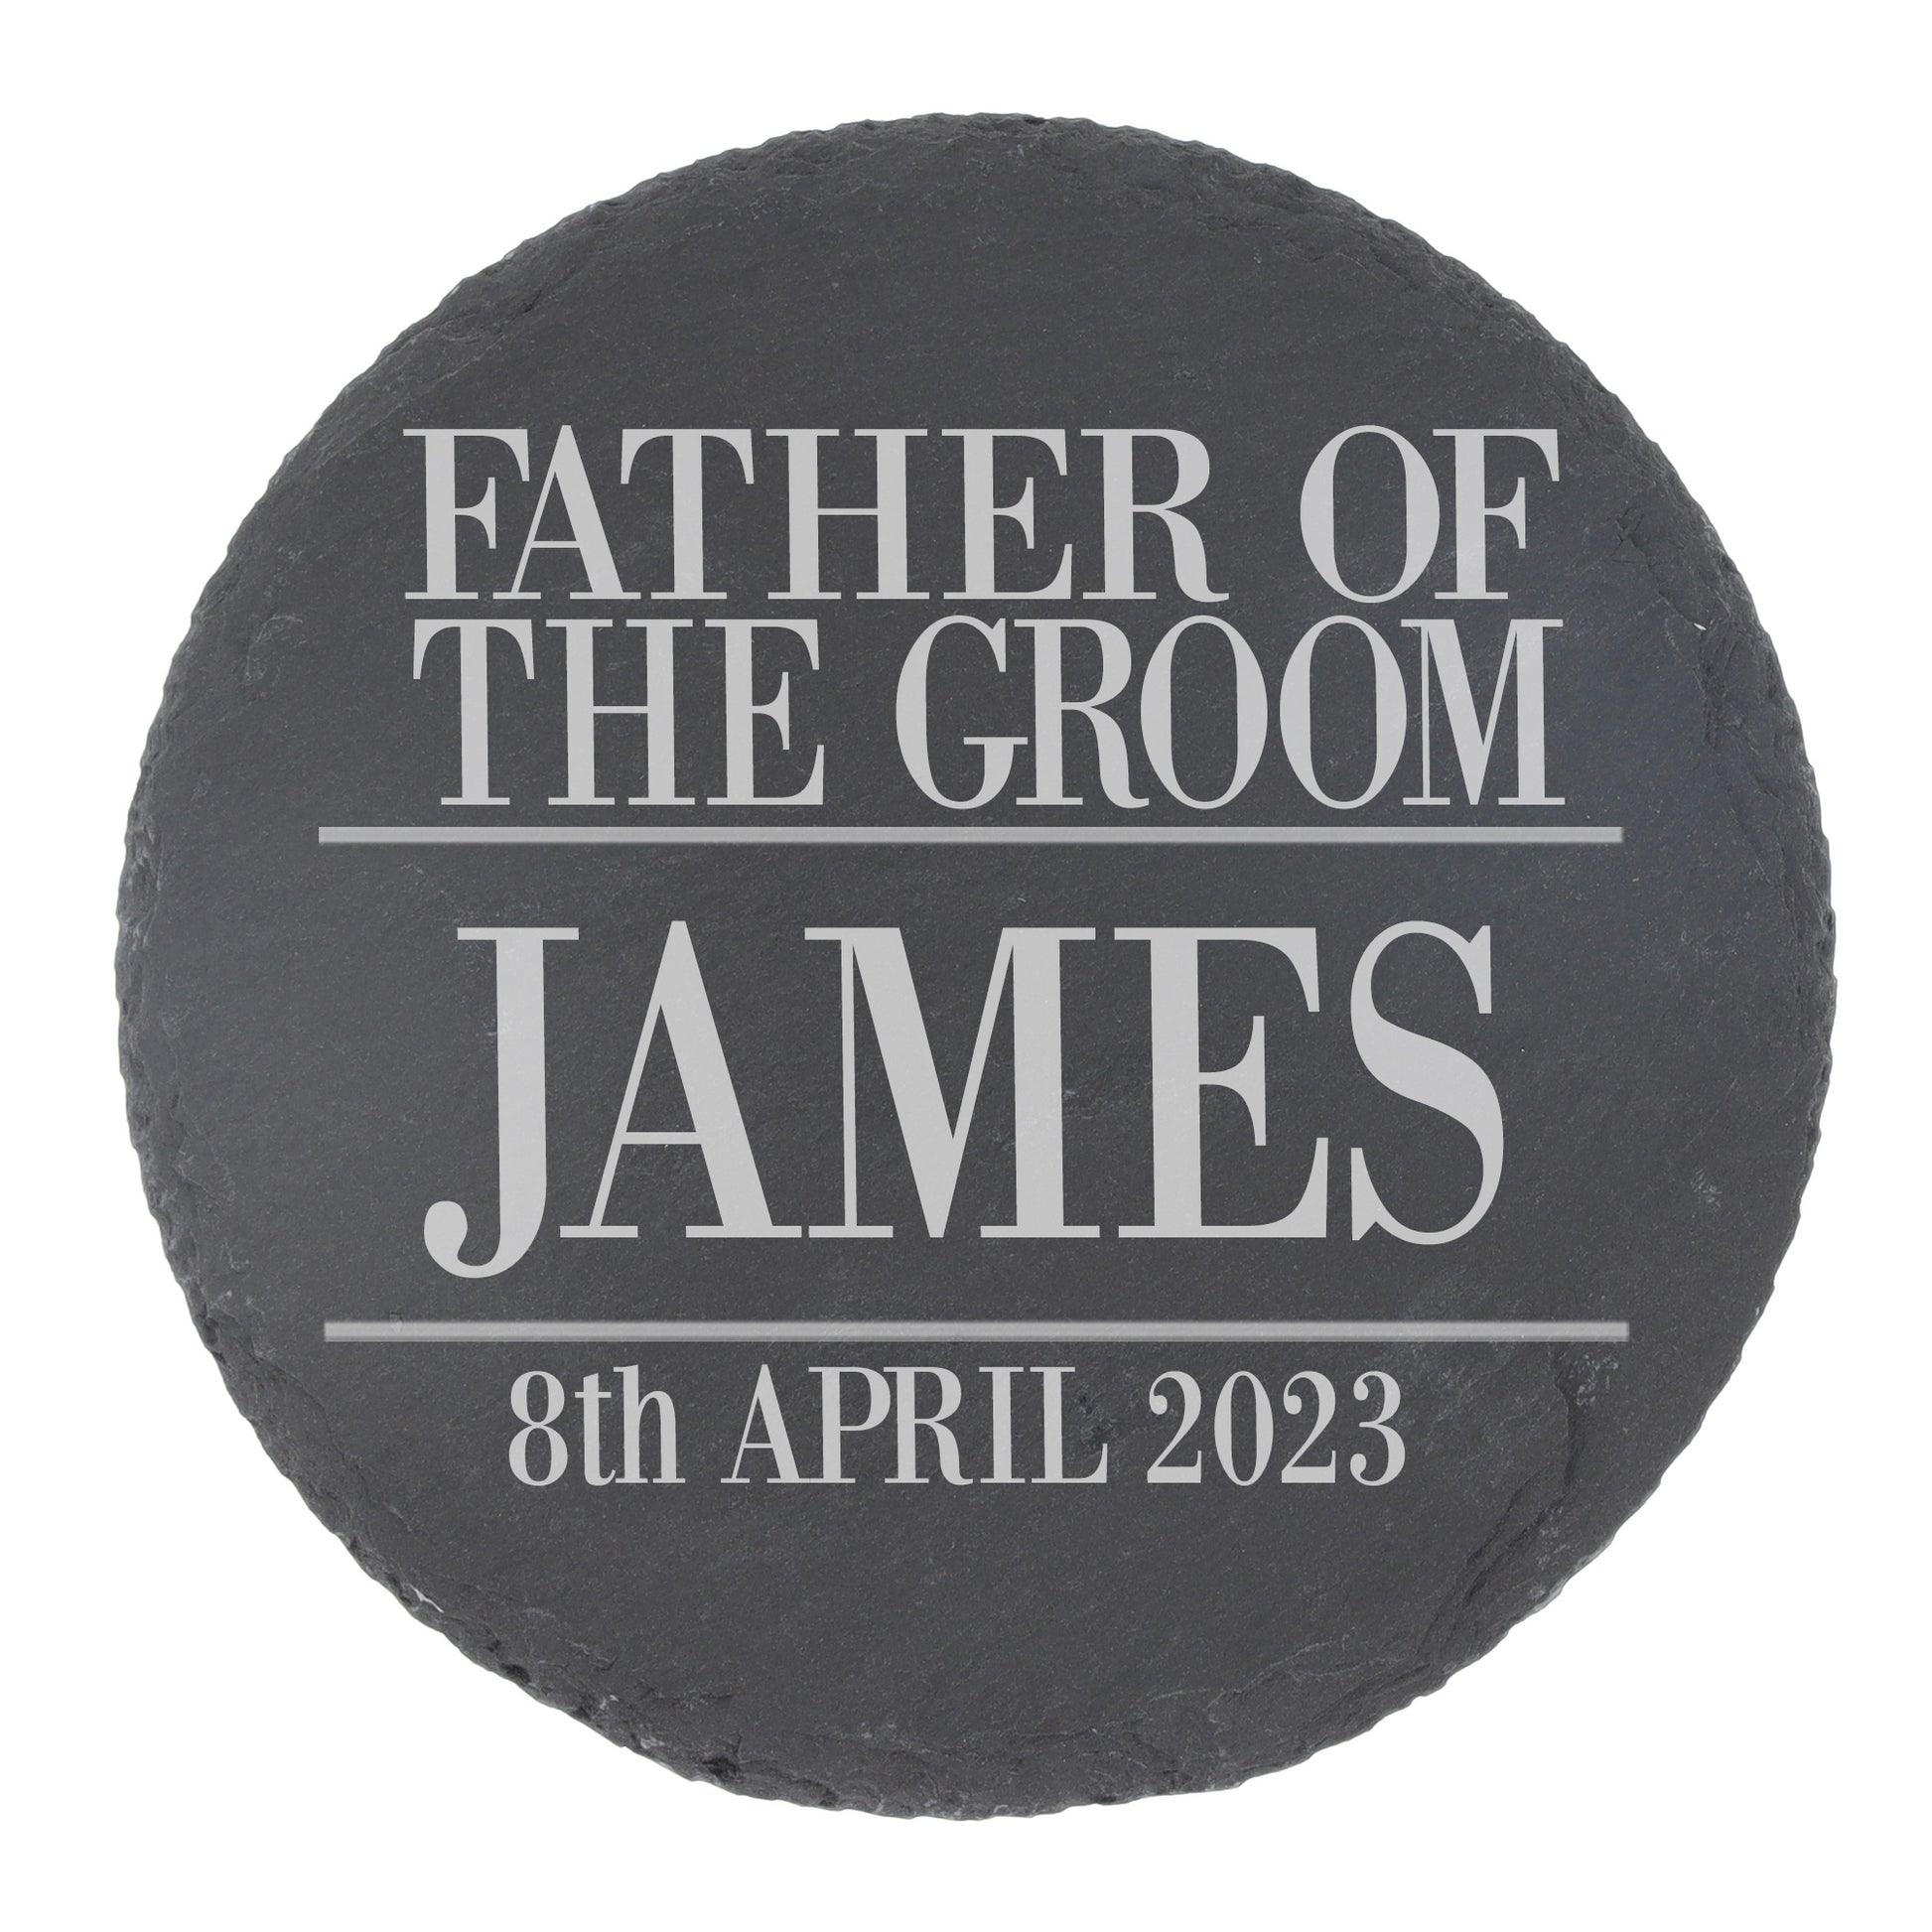 Personalised Father Of The Groom Whisky Glass and/or Coaster Set  - Always Looking Good - Round Coaster On Its Own  